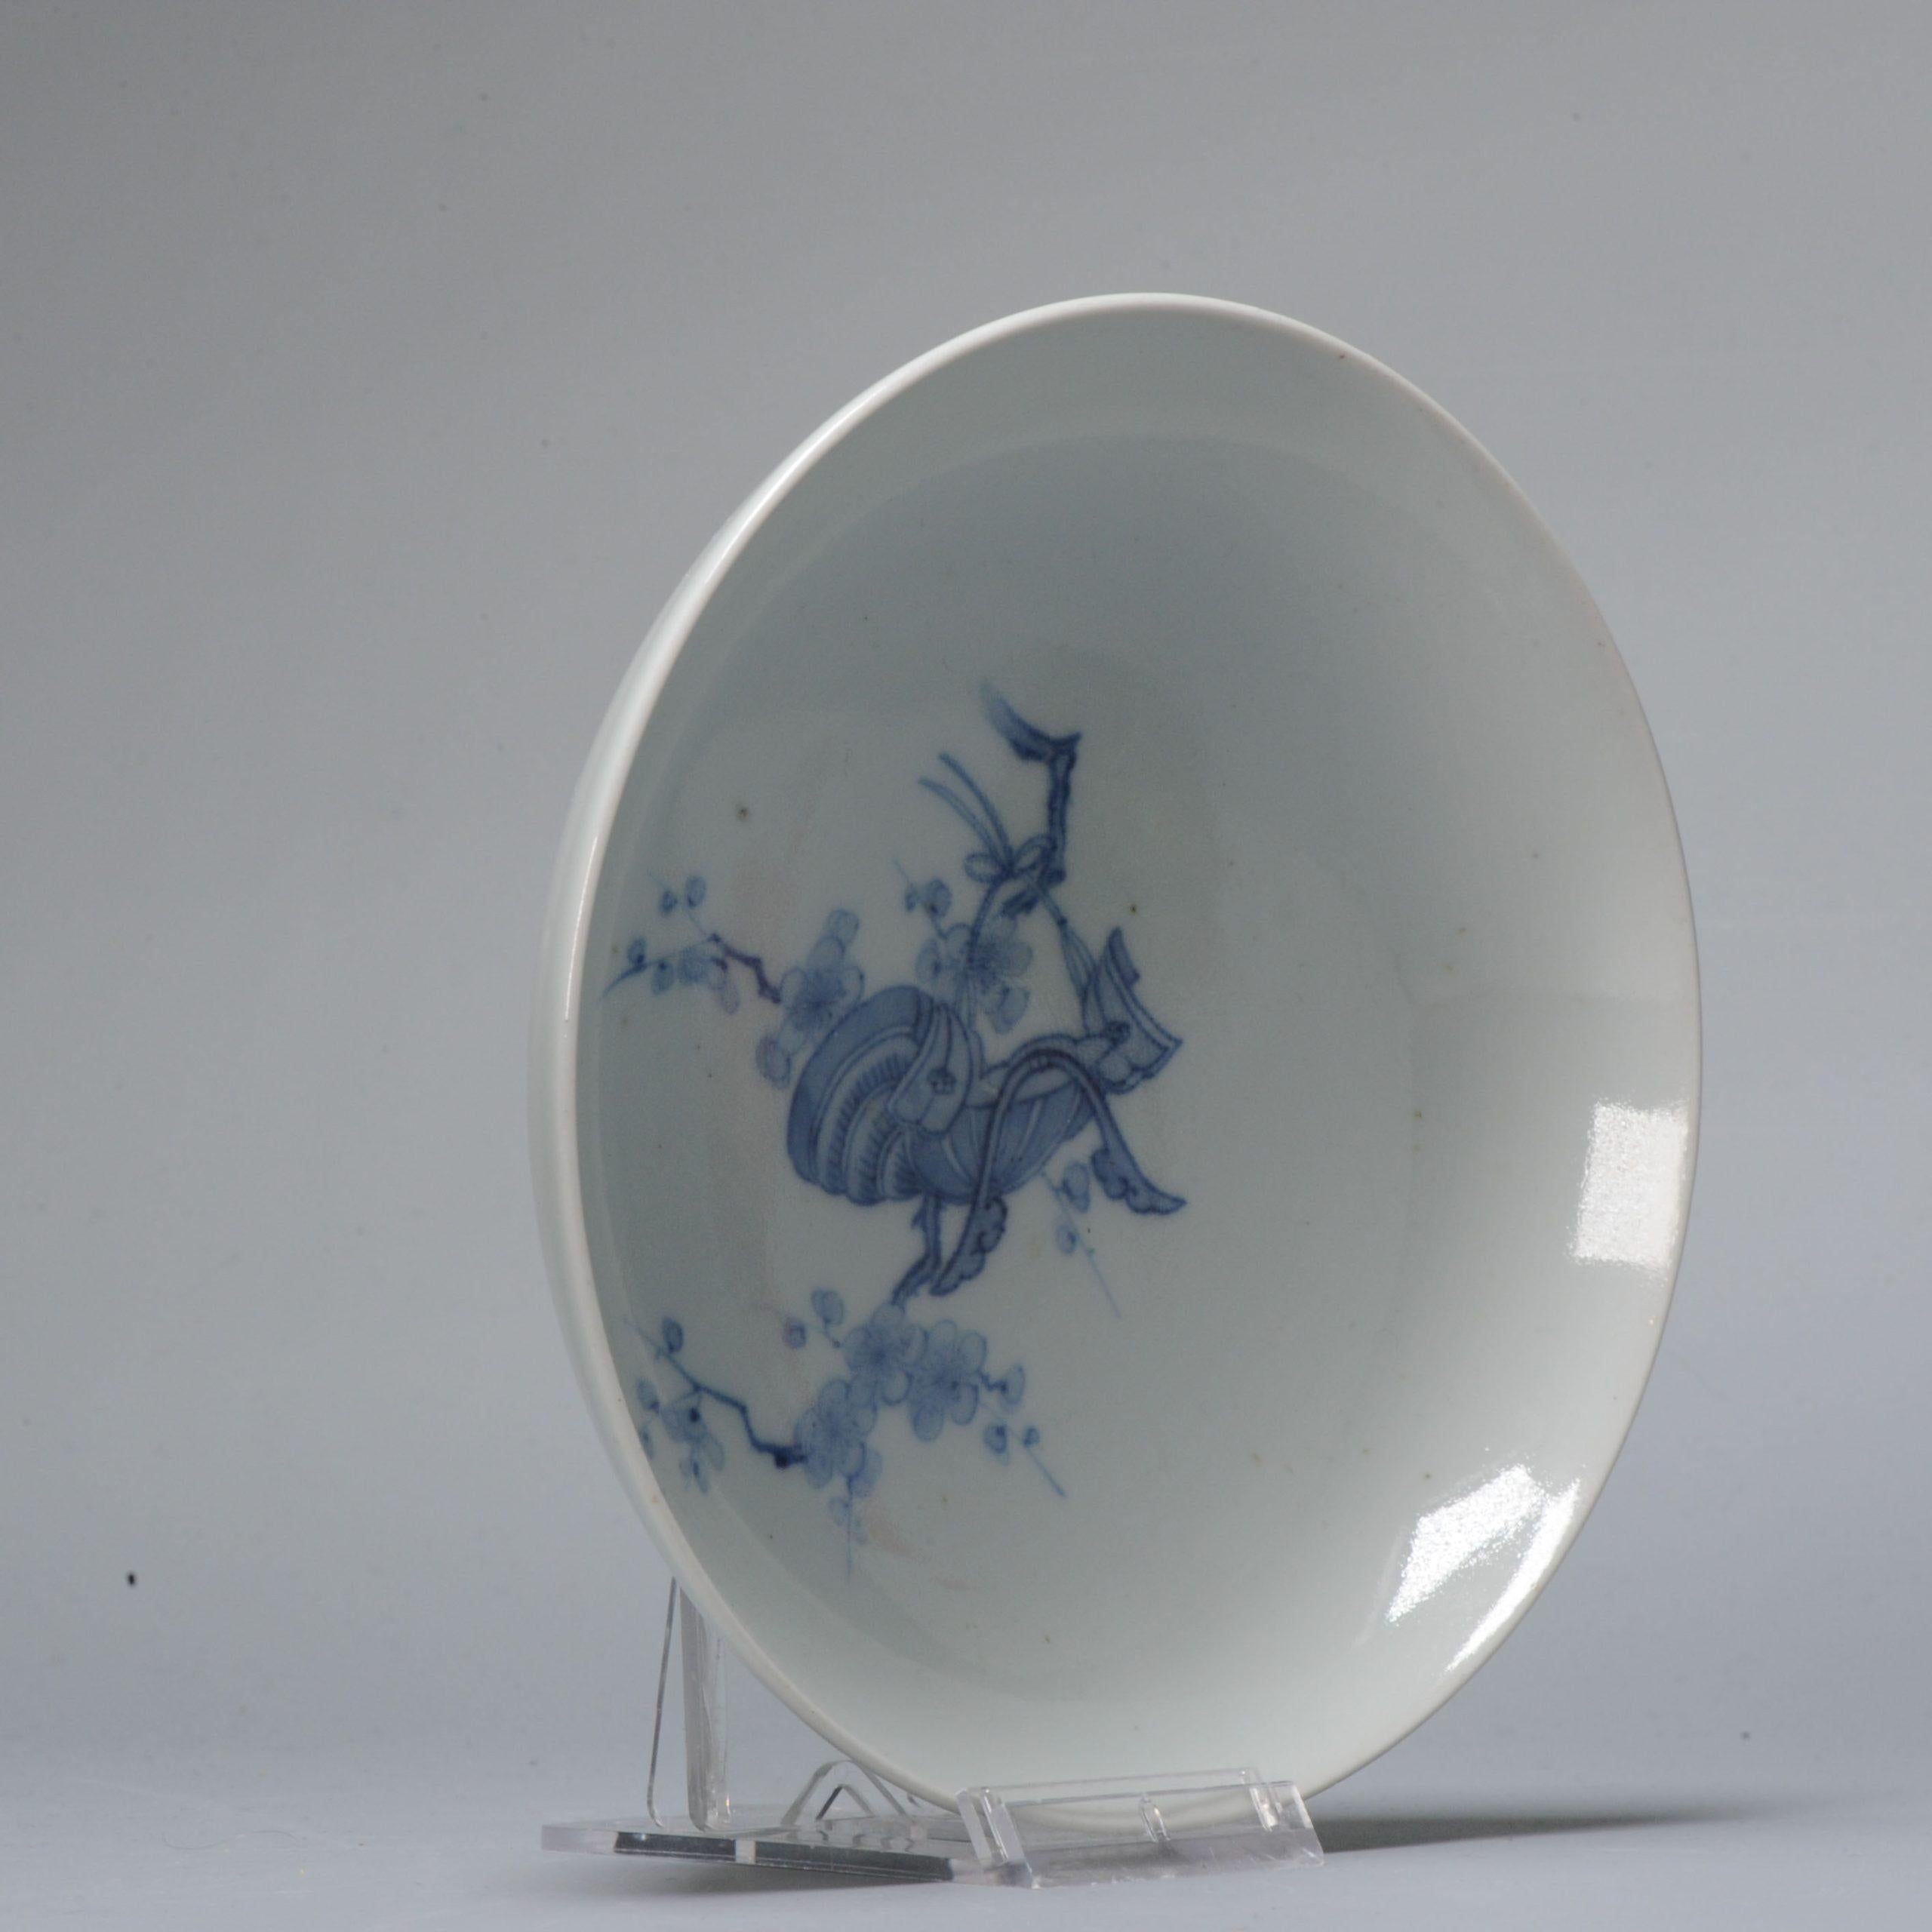 A great plate dating to the 17th century, delicate painting and shape.

Additional information:
Material: Porcelain & Pottery
Region of Origin: Japan
Period: 17th century
Age: Pre-1800
Condition: Perfect, just a firing flaw to base rim. 
Dimension: